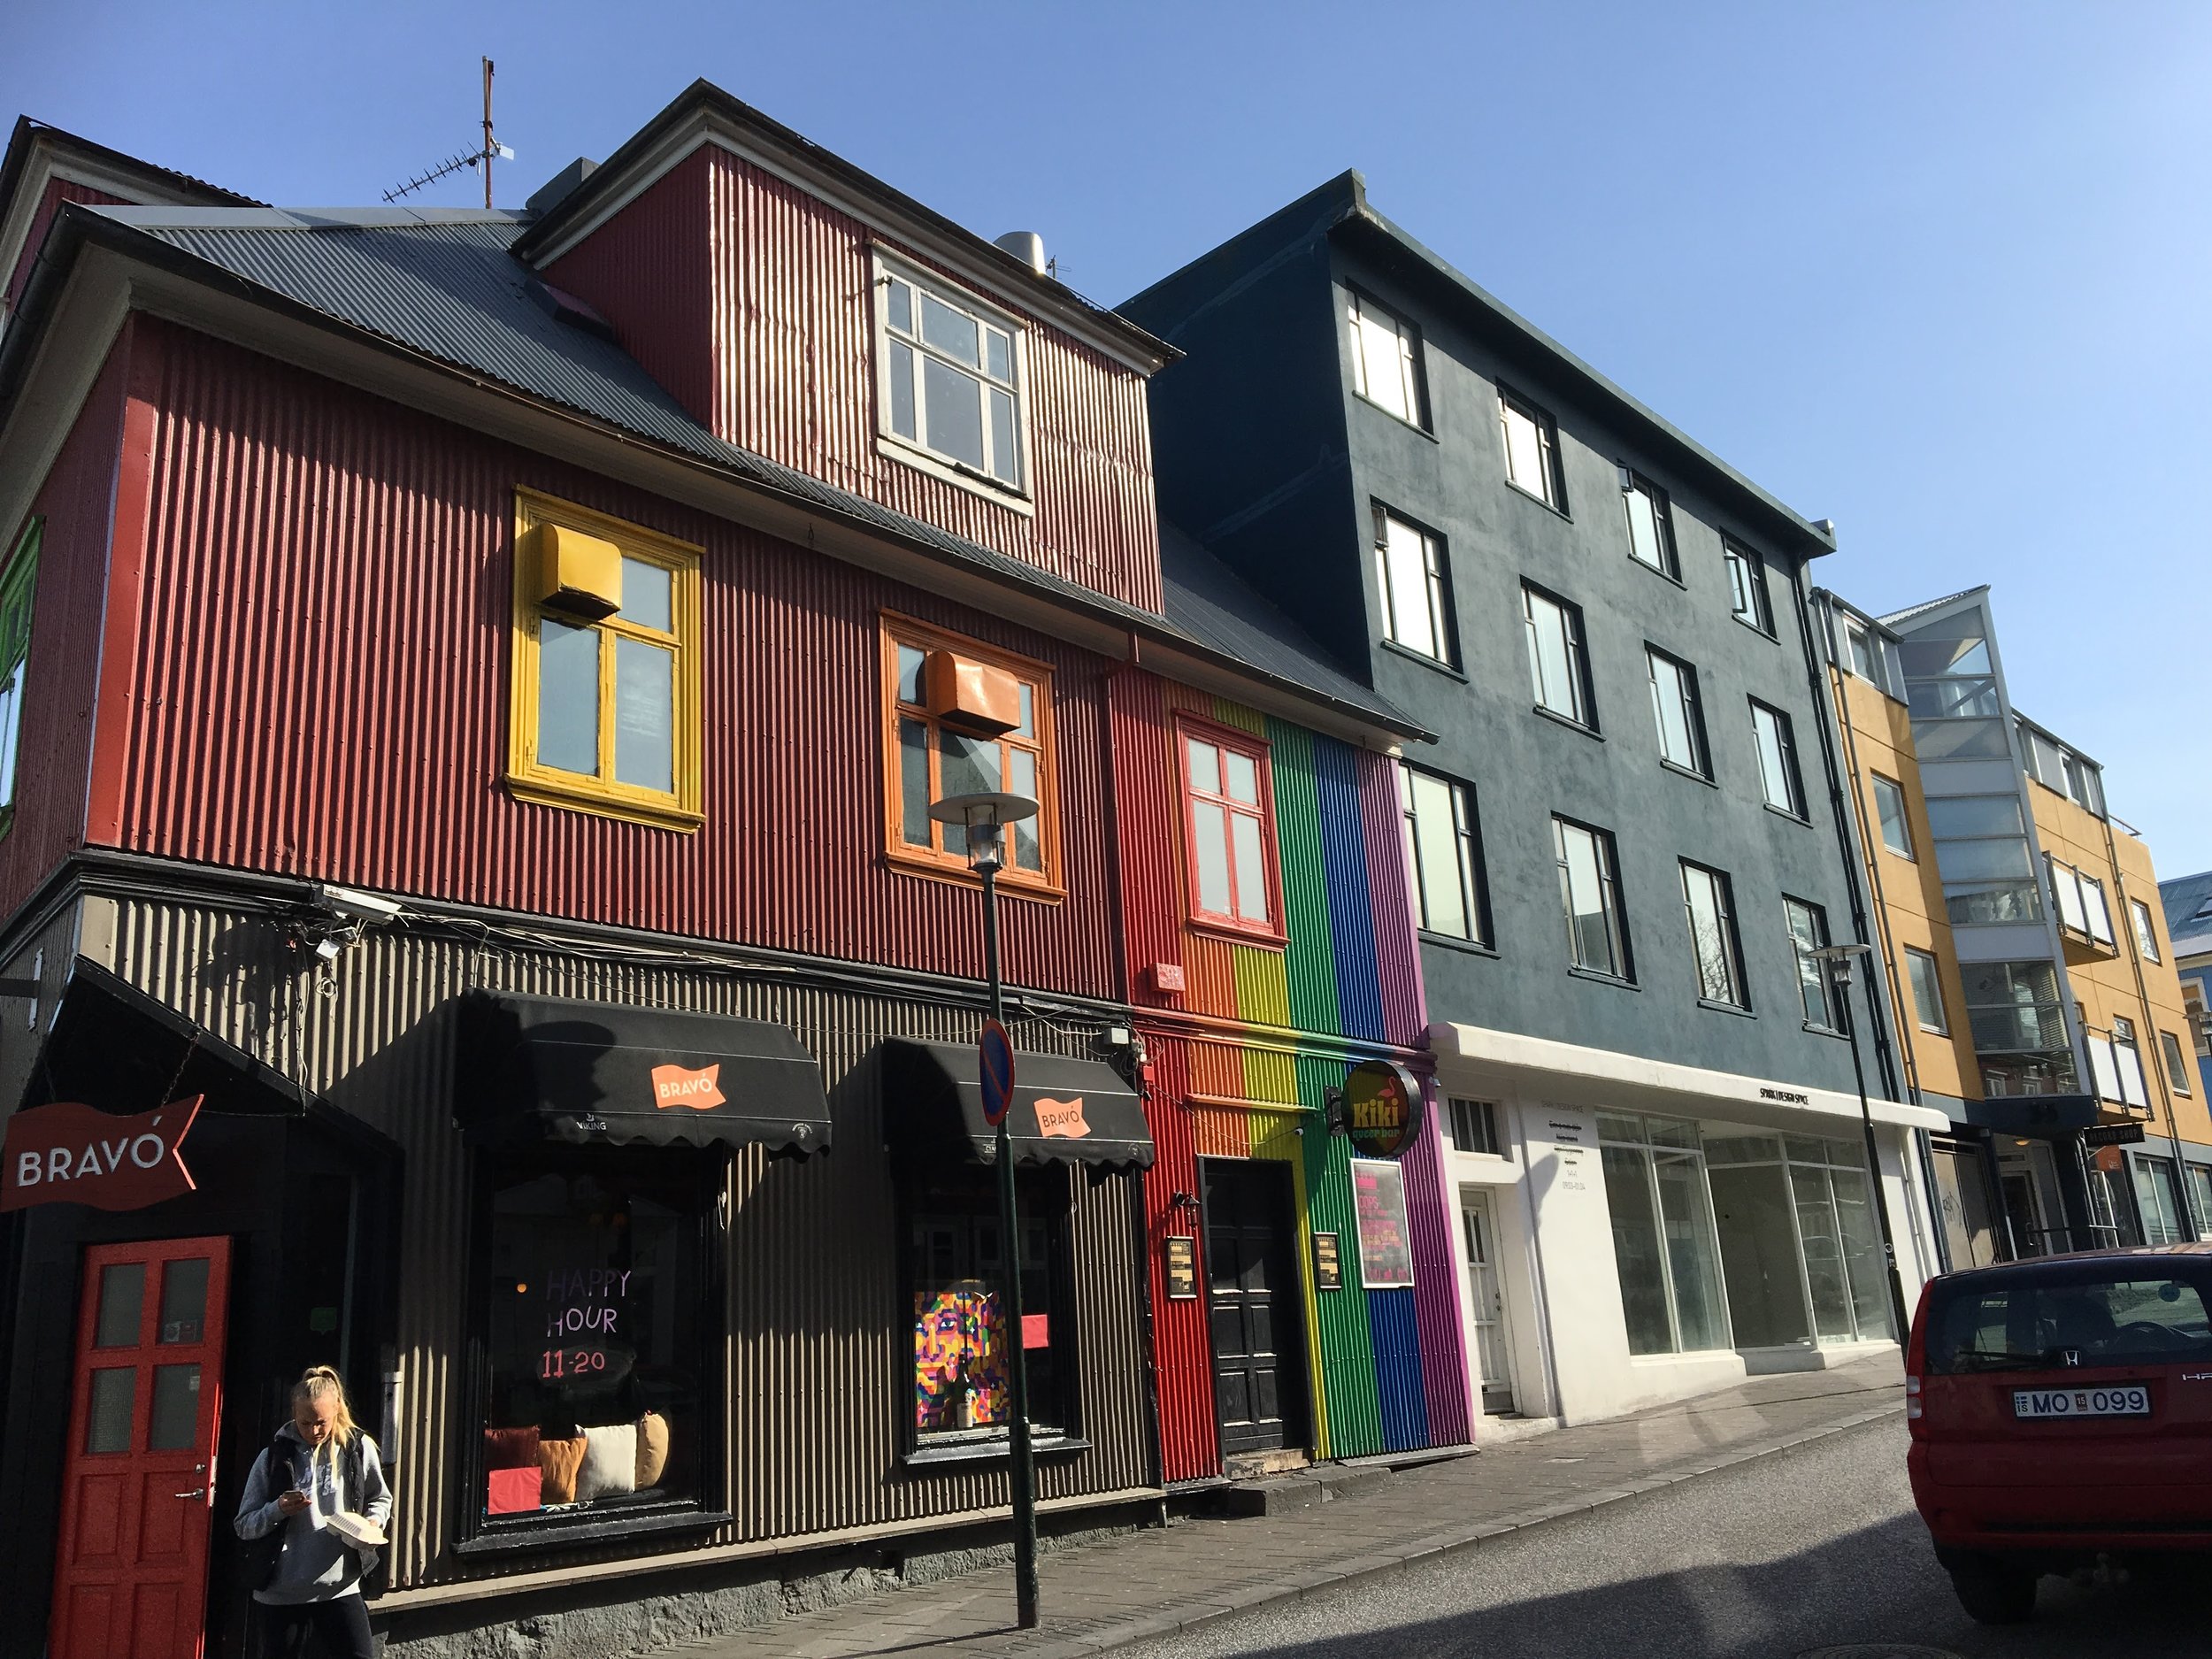 Iceland buildings on street - 55 by 55 Travel